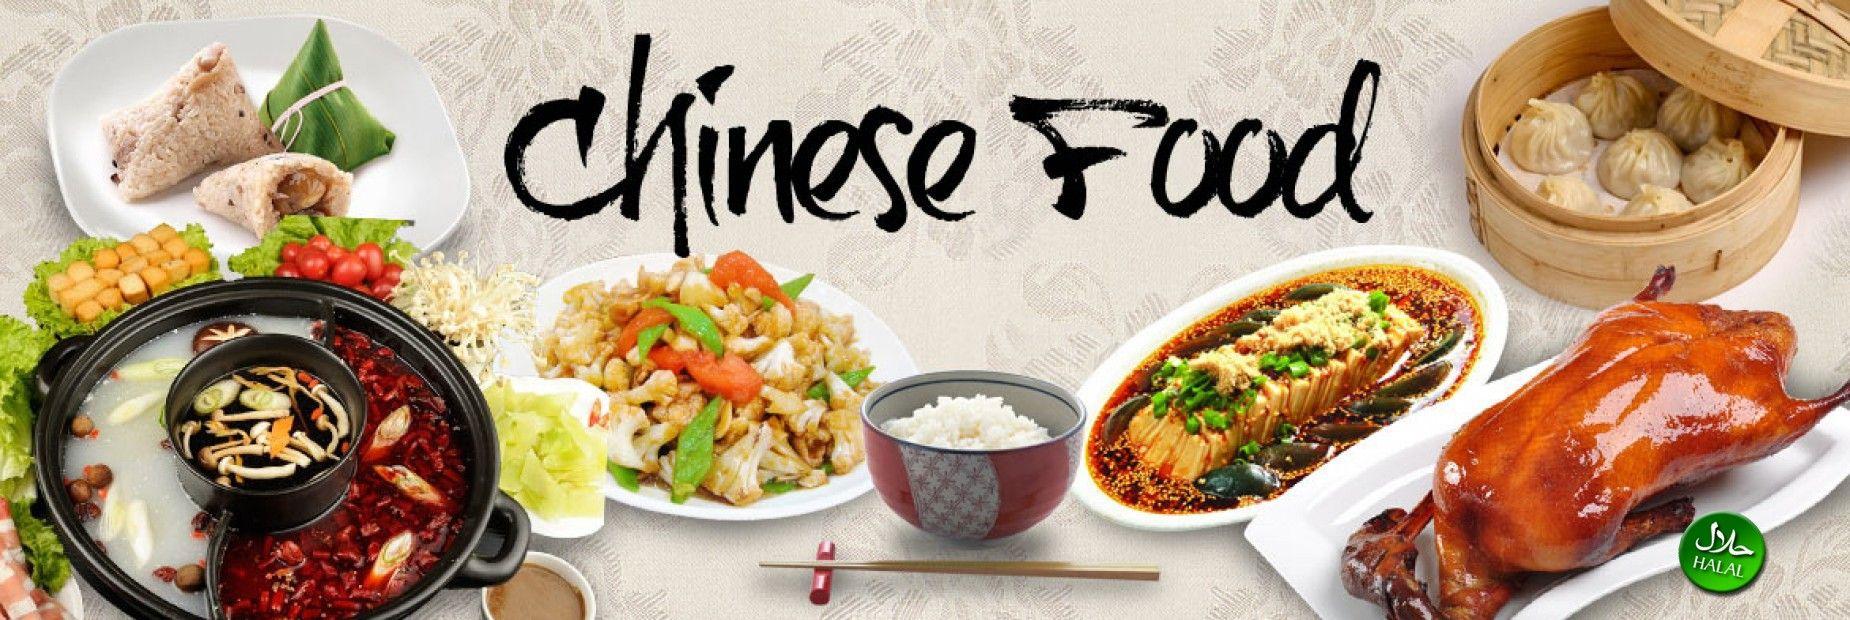 Chinese Food Wallpapers and Backgrounds Image